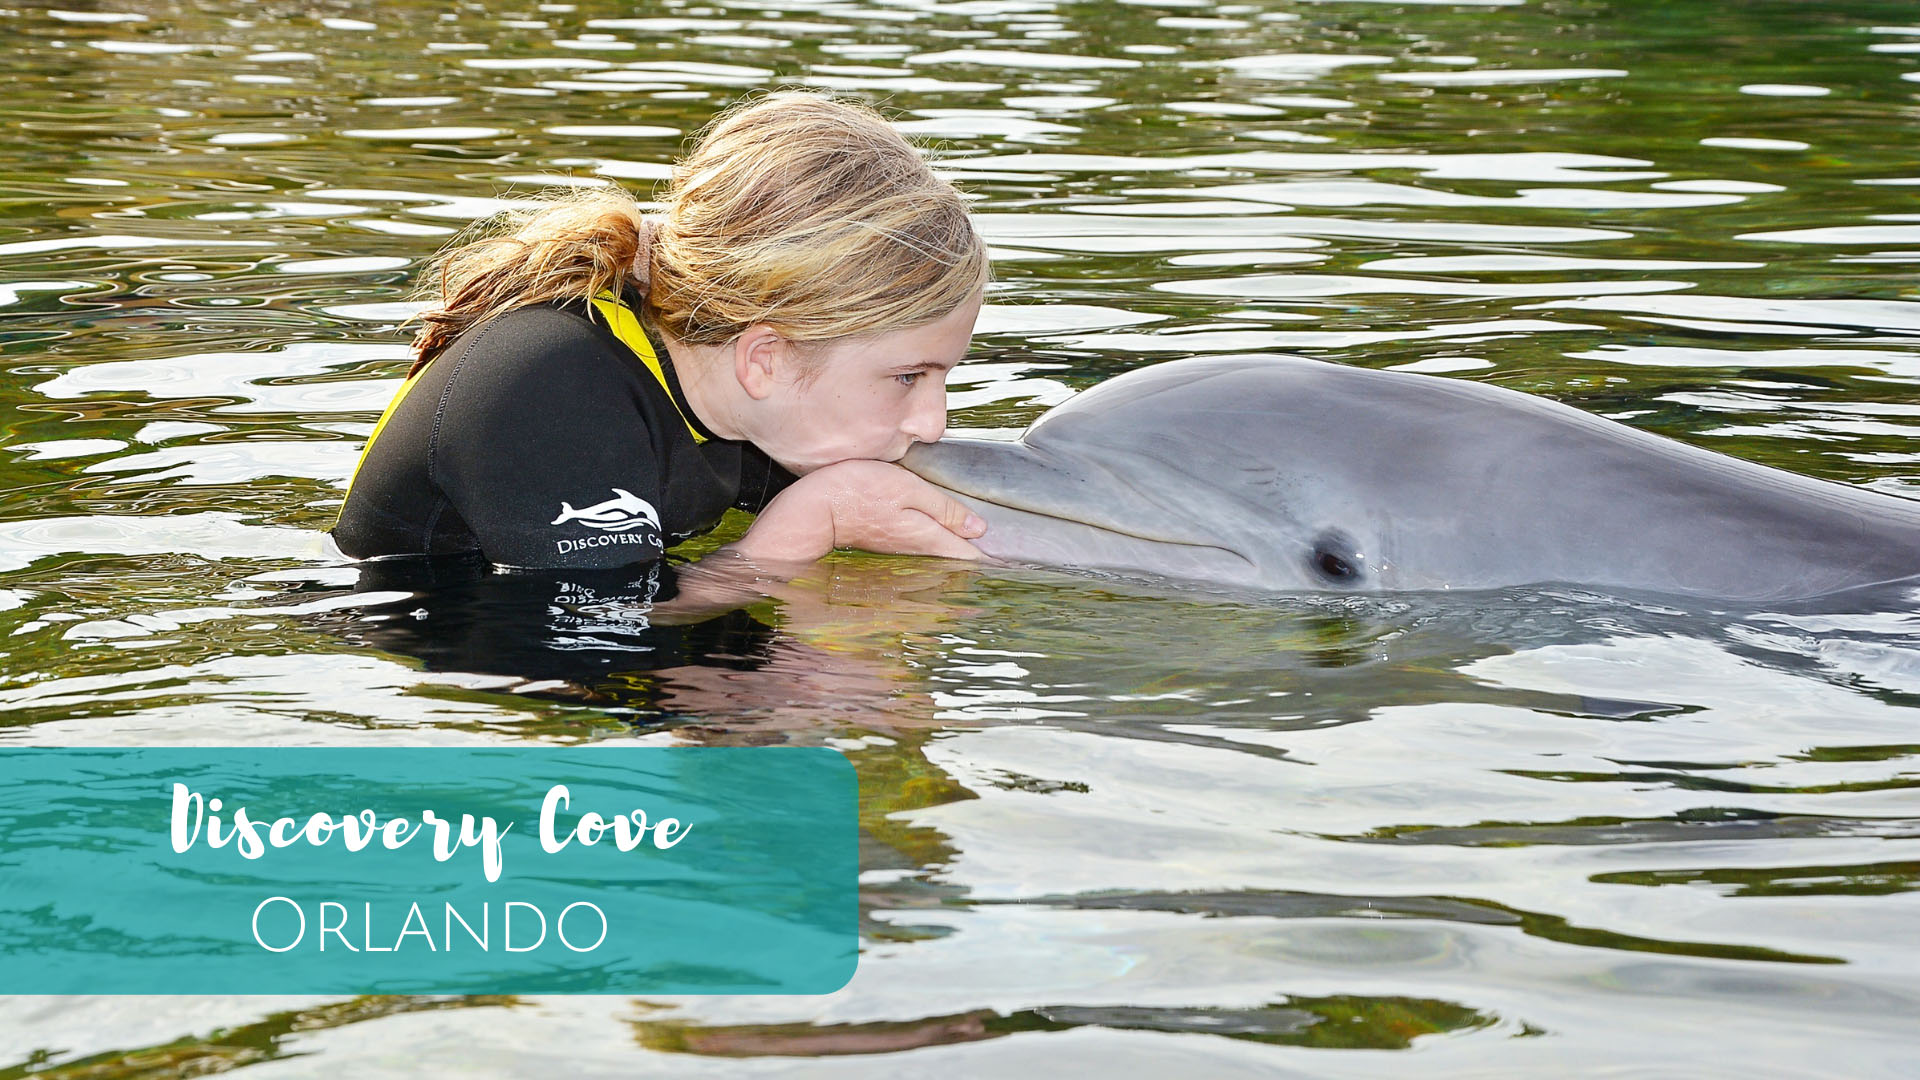 Swim with dolphins at Discovery Cove in Orlando, Florida